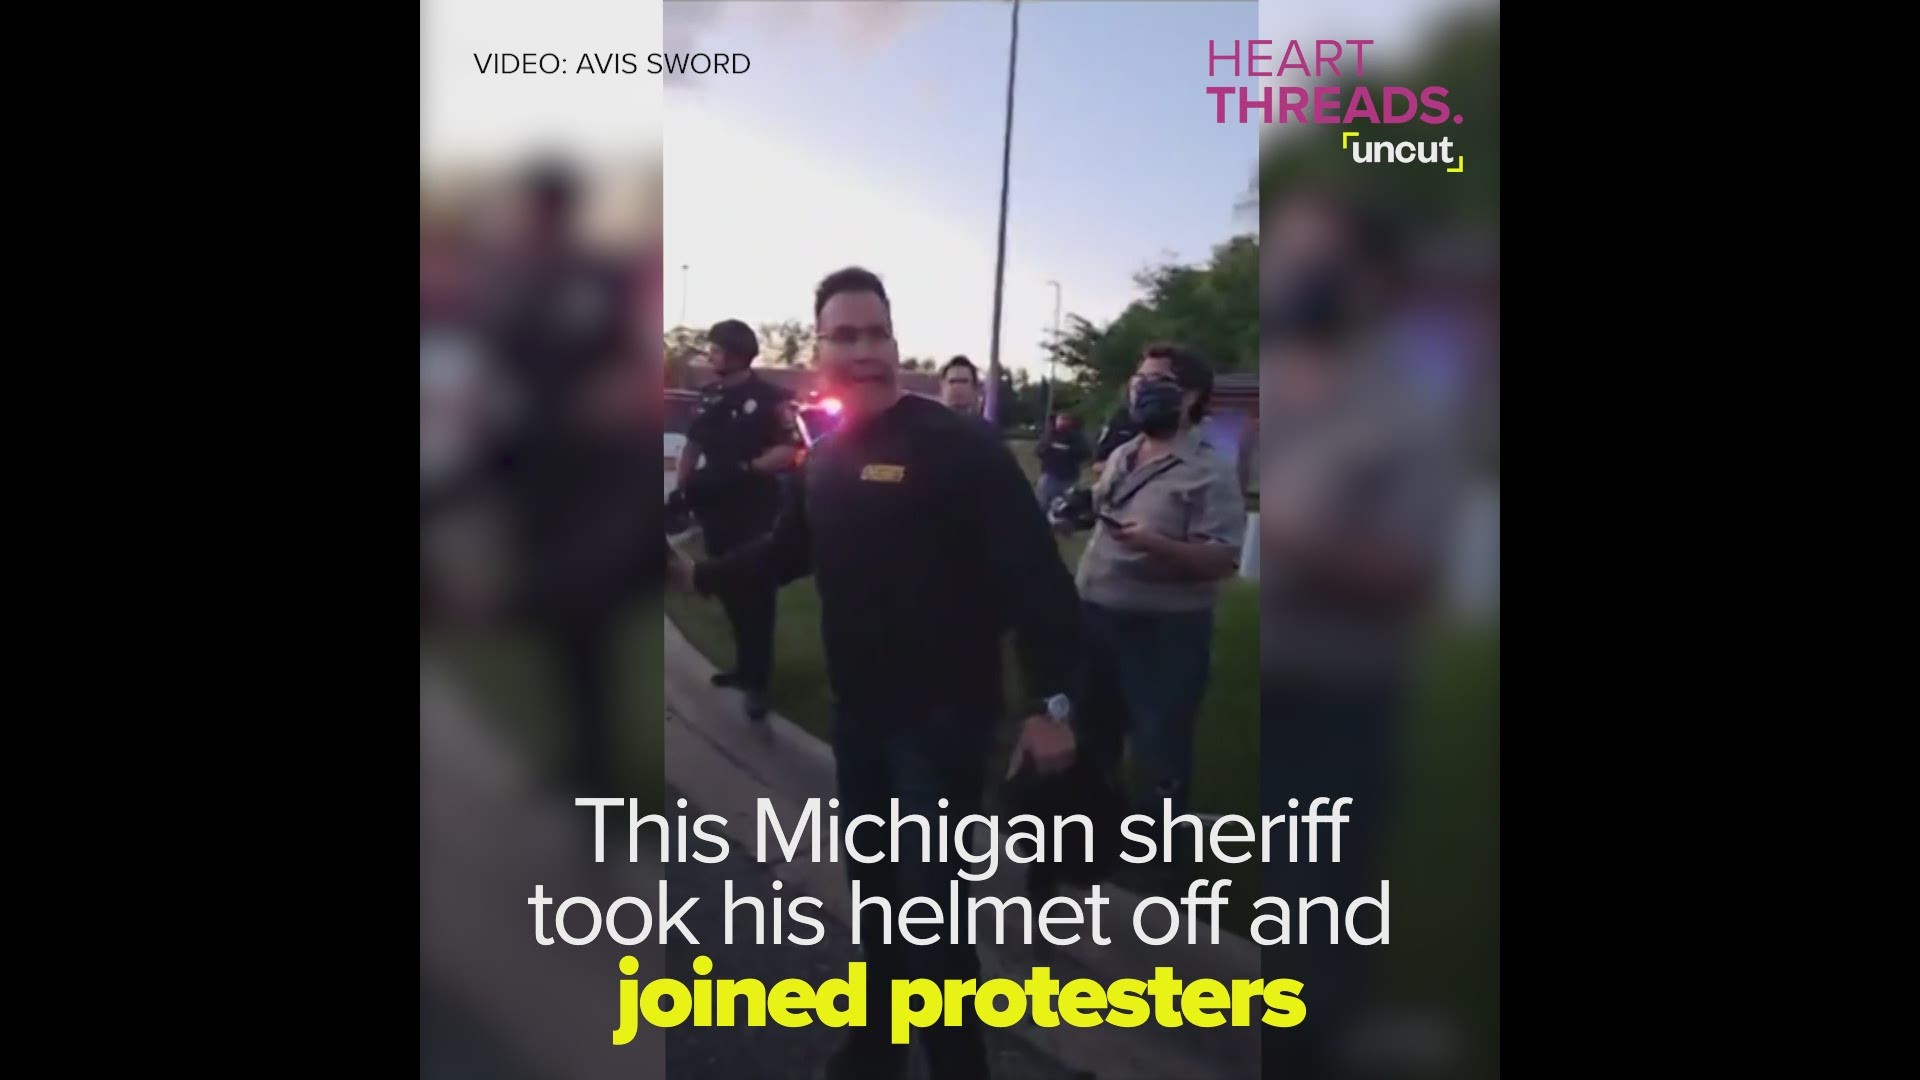 Sheriff Chris Swanson joined demonstrators at a protest demanding justice for the death of George Floyd, who died after being pinned down by a police officer.